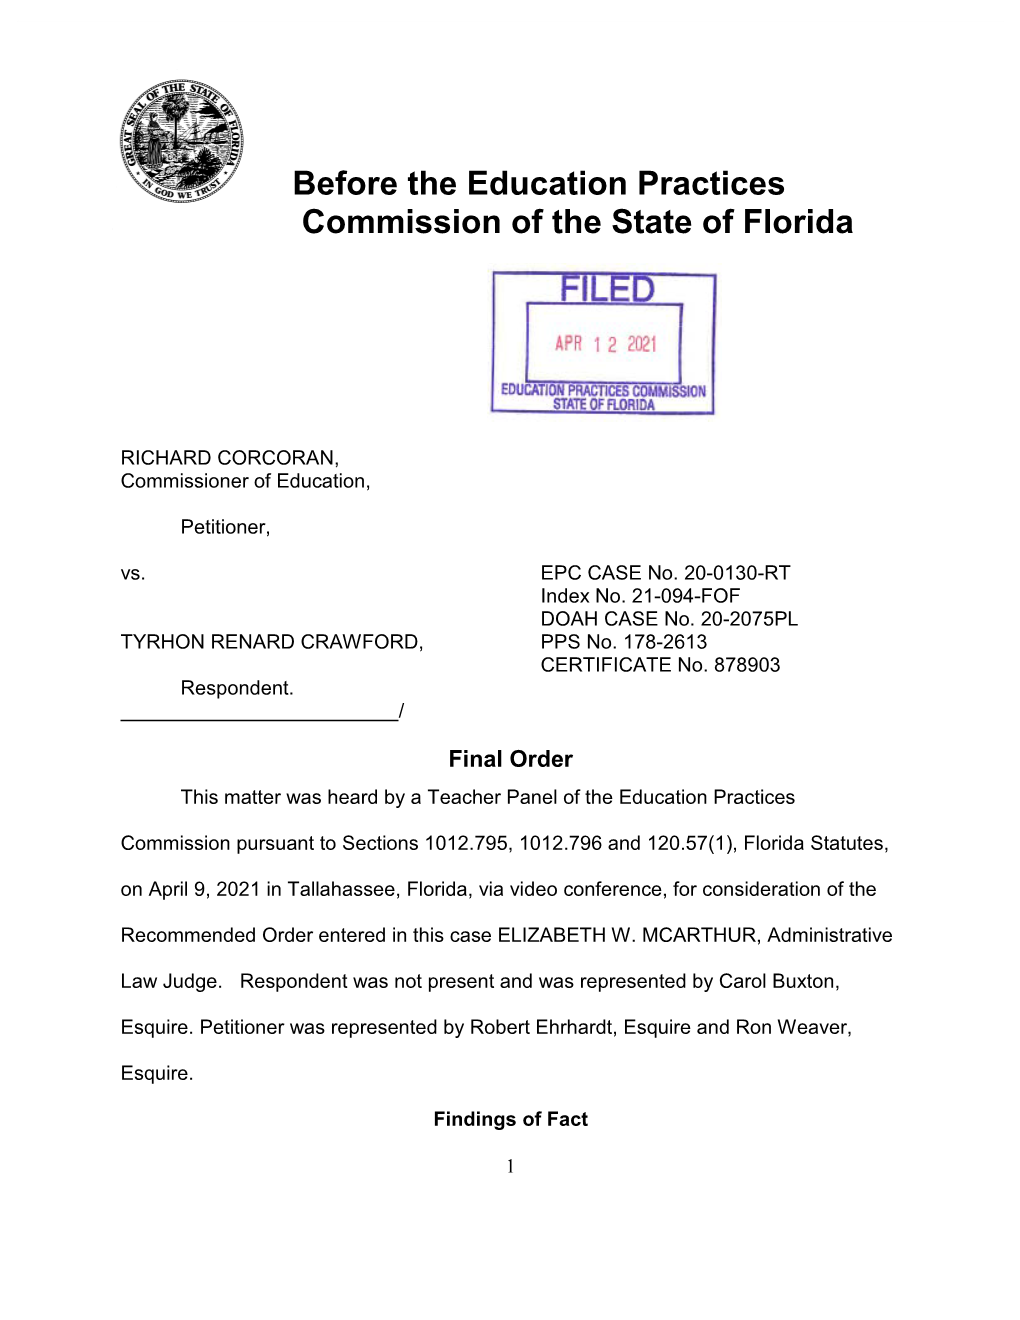 Before the Education Practices Commission of the State of Florida